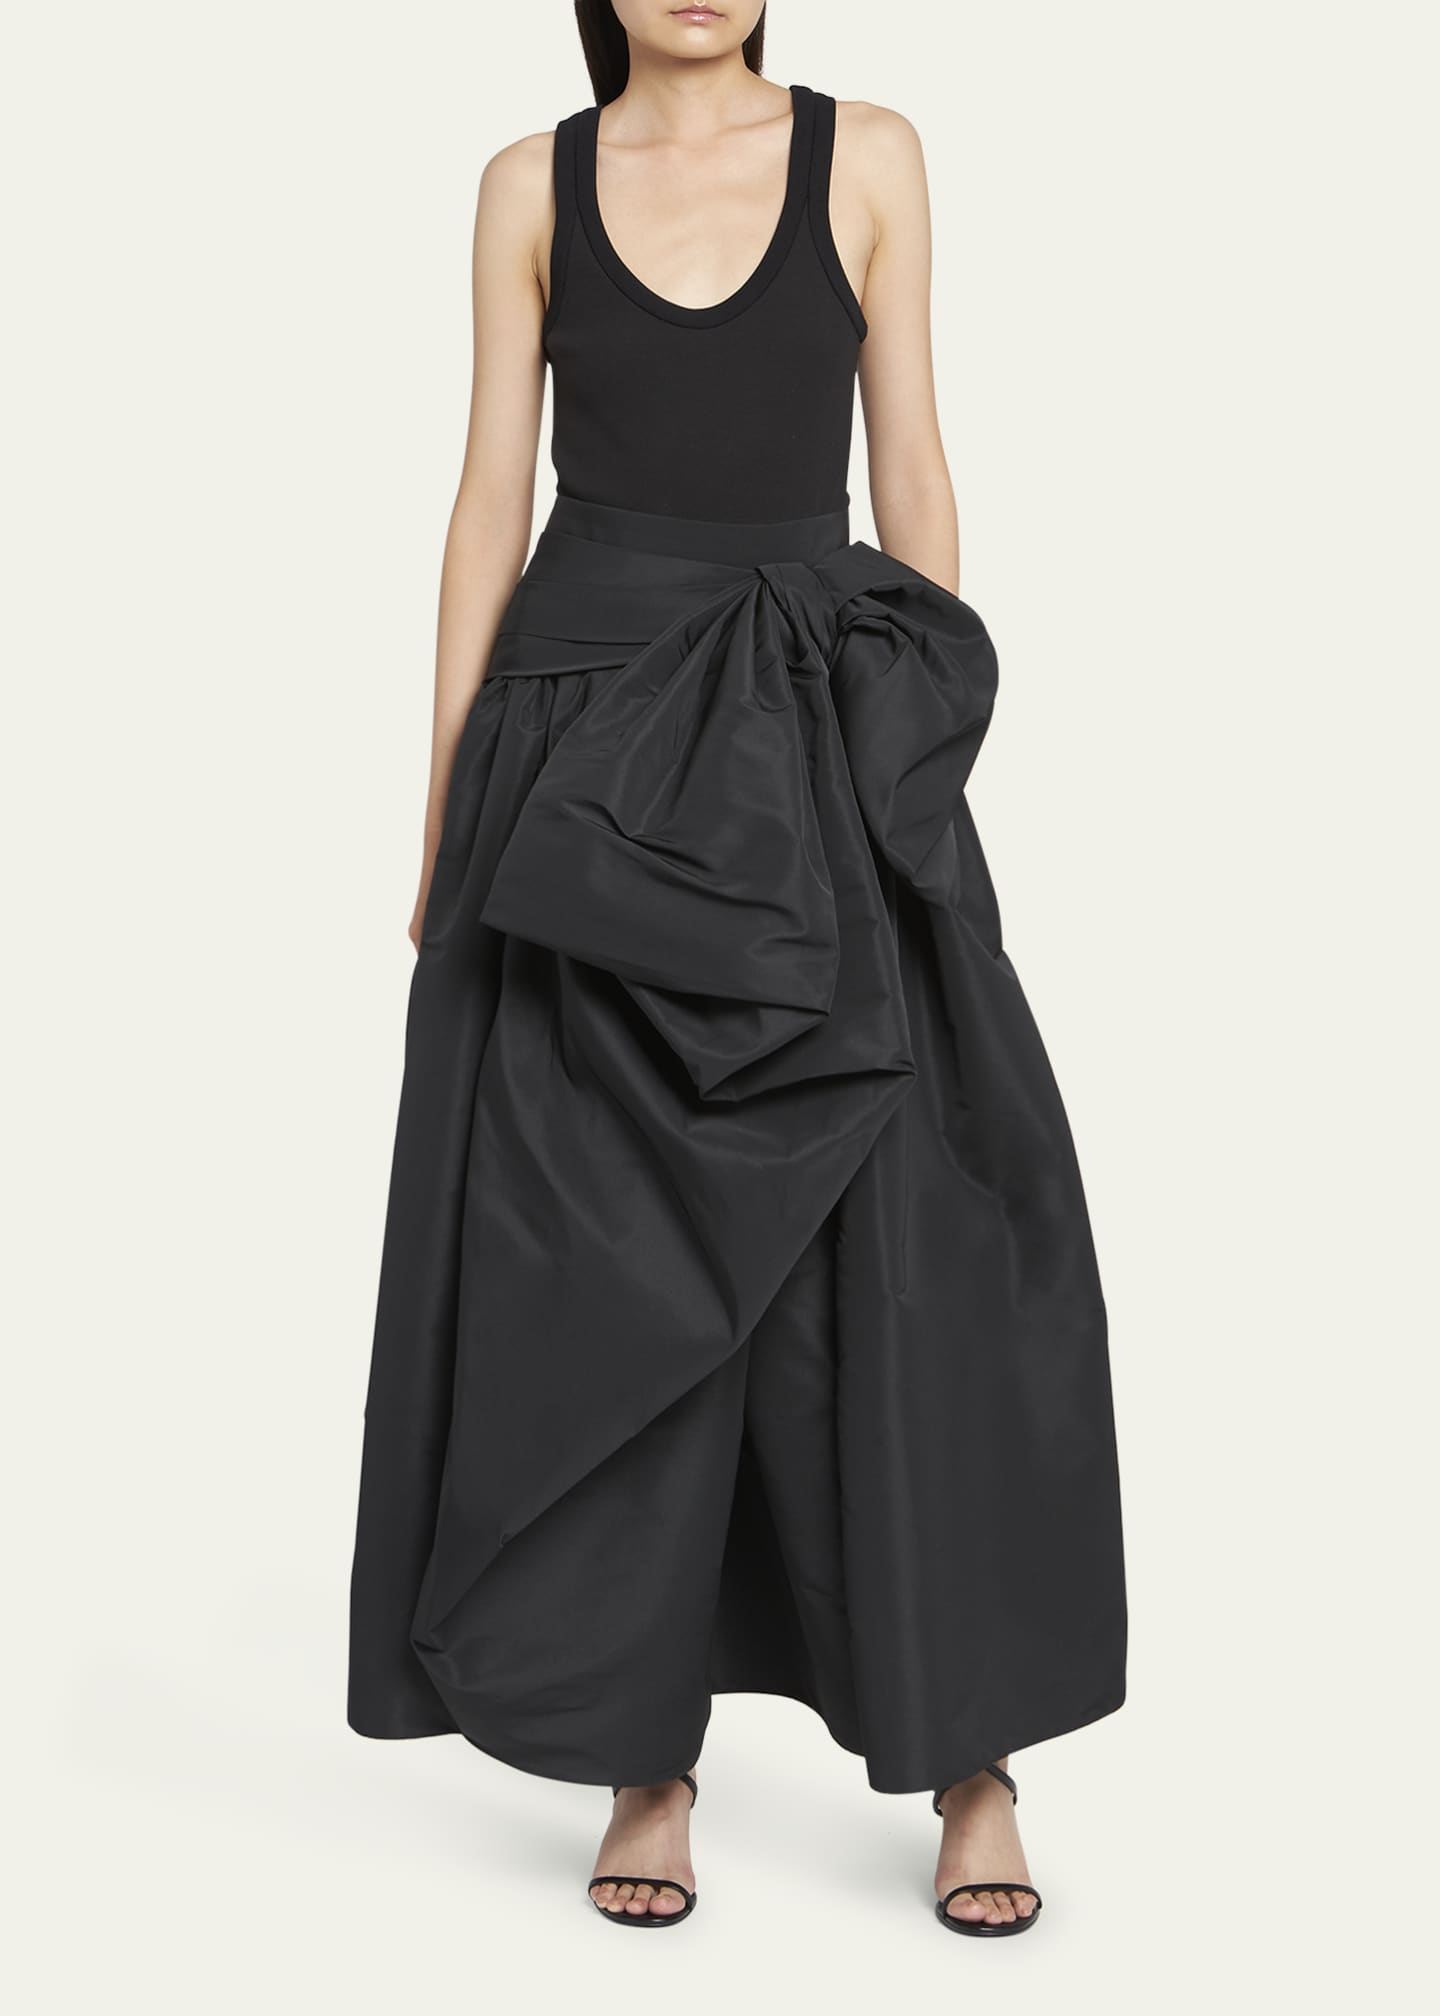 Alexander McQueen Ruched Full Skirt Gown with Bow Detail - Bergdorf Goodman